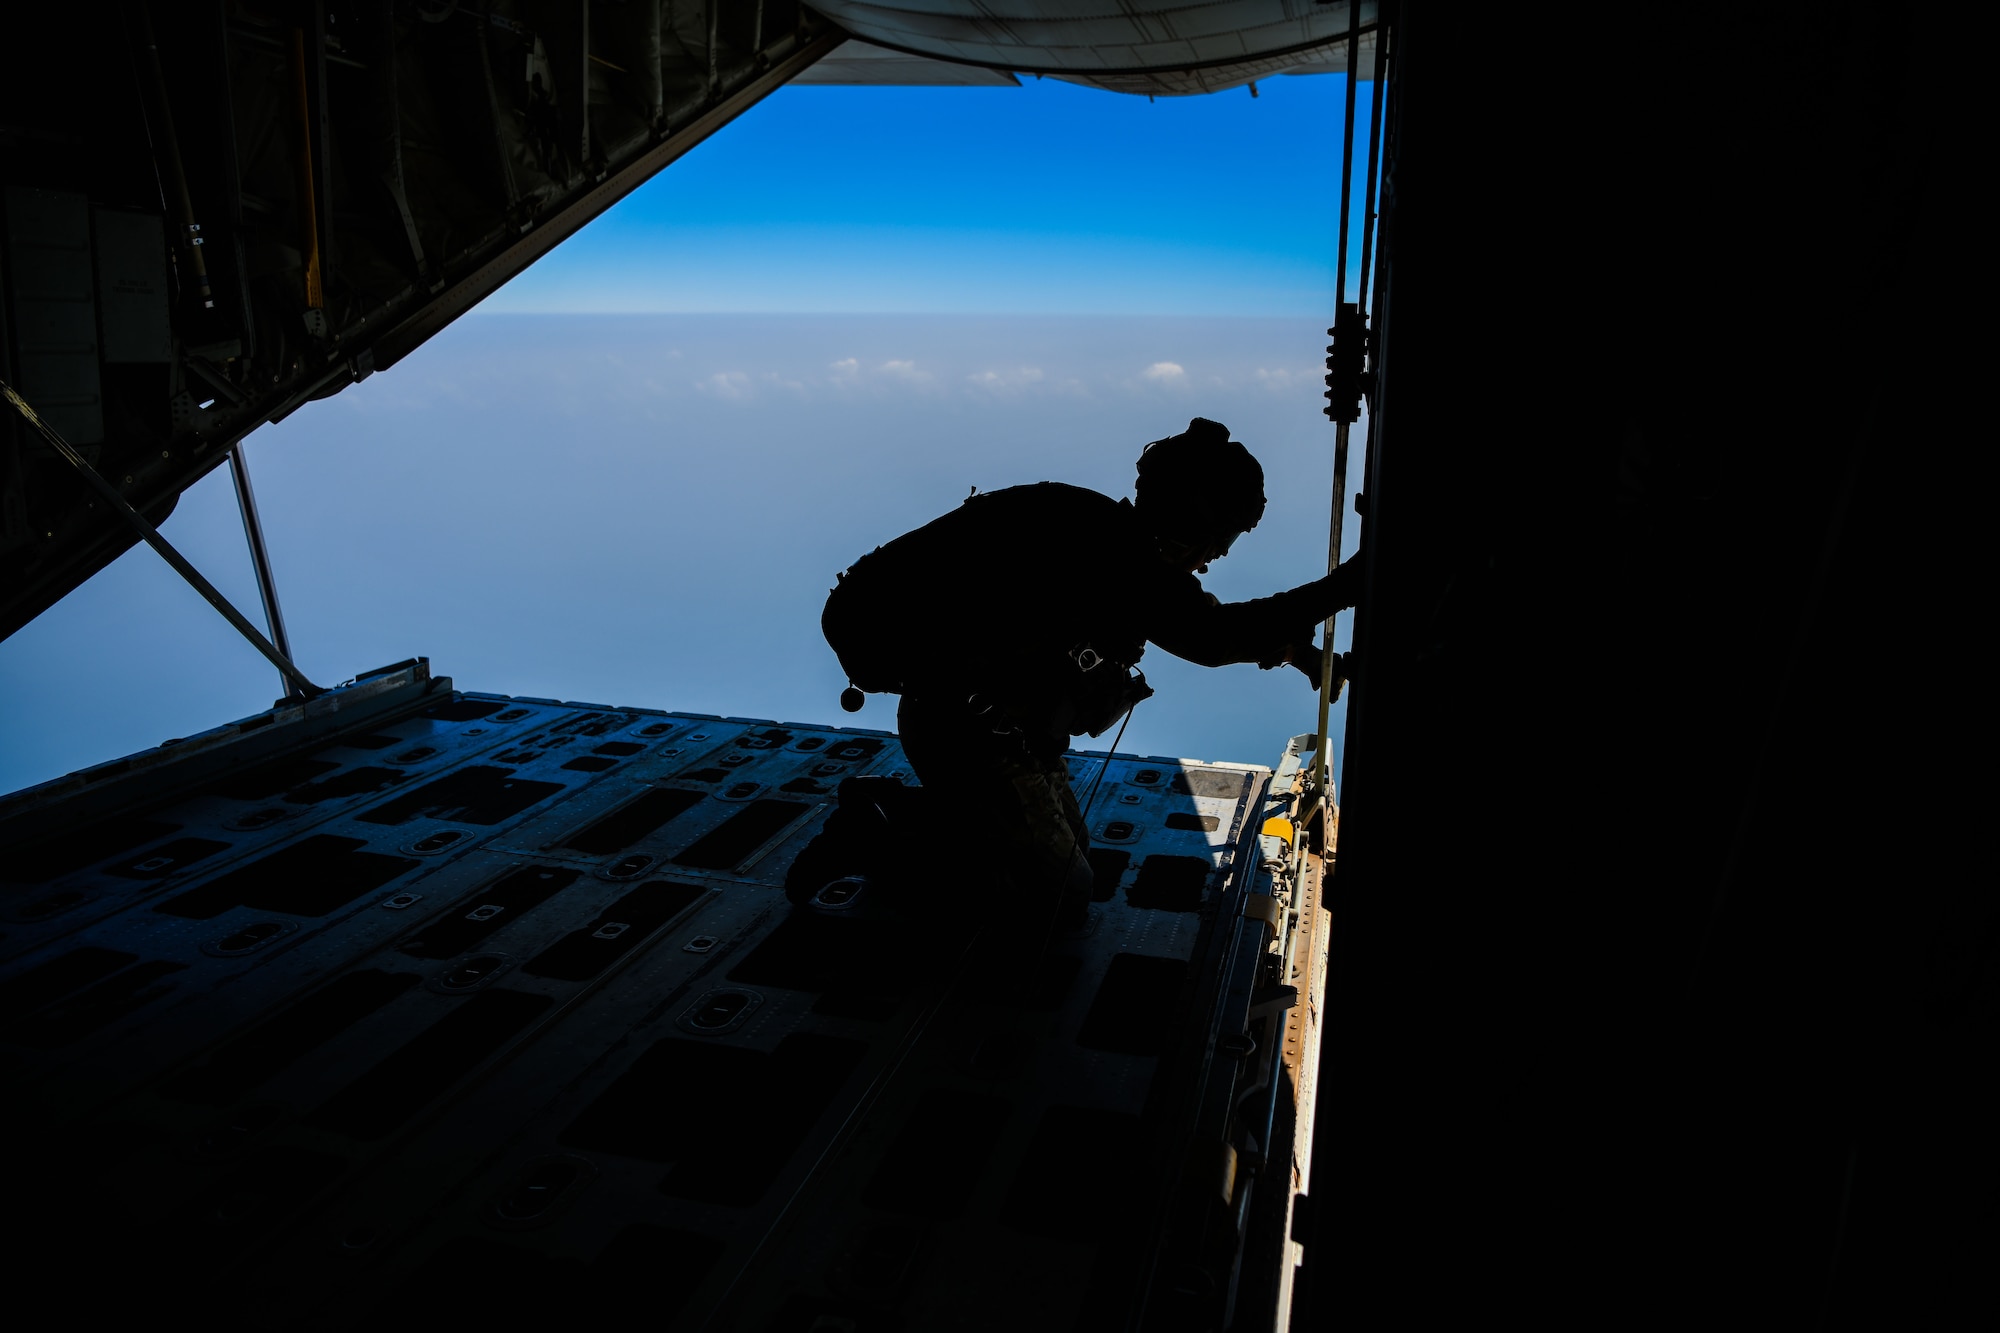 U.S. Air Force pararescuemen assigned to the 82nd Expeditionary Rescue Squadron, prepare for a training jump from a U.S. Marine Corps KC-130J Super Hercules over East Africa, Feb. 15, 2021. The 82nd ERQS maintains jump proficiency to provide secure, reliable, flexible combat search, rescue, and recovery capabilities in support of U.S. Africa Command in North and East Africa. They are qualified experts in advanced weapons and small unit tactics, airborne and military free fall, combat divers, high angle and confined space rescue operations, small boat and vehicle craft utilization, rescue swimmers, and battlefield trauma-paramedics. (U.S. Air Force photo by Senior Airman Ericka A. Woolever)